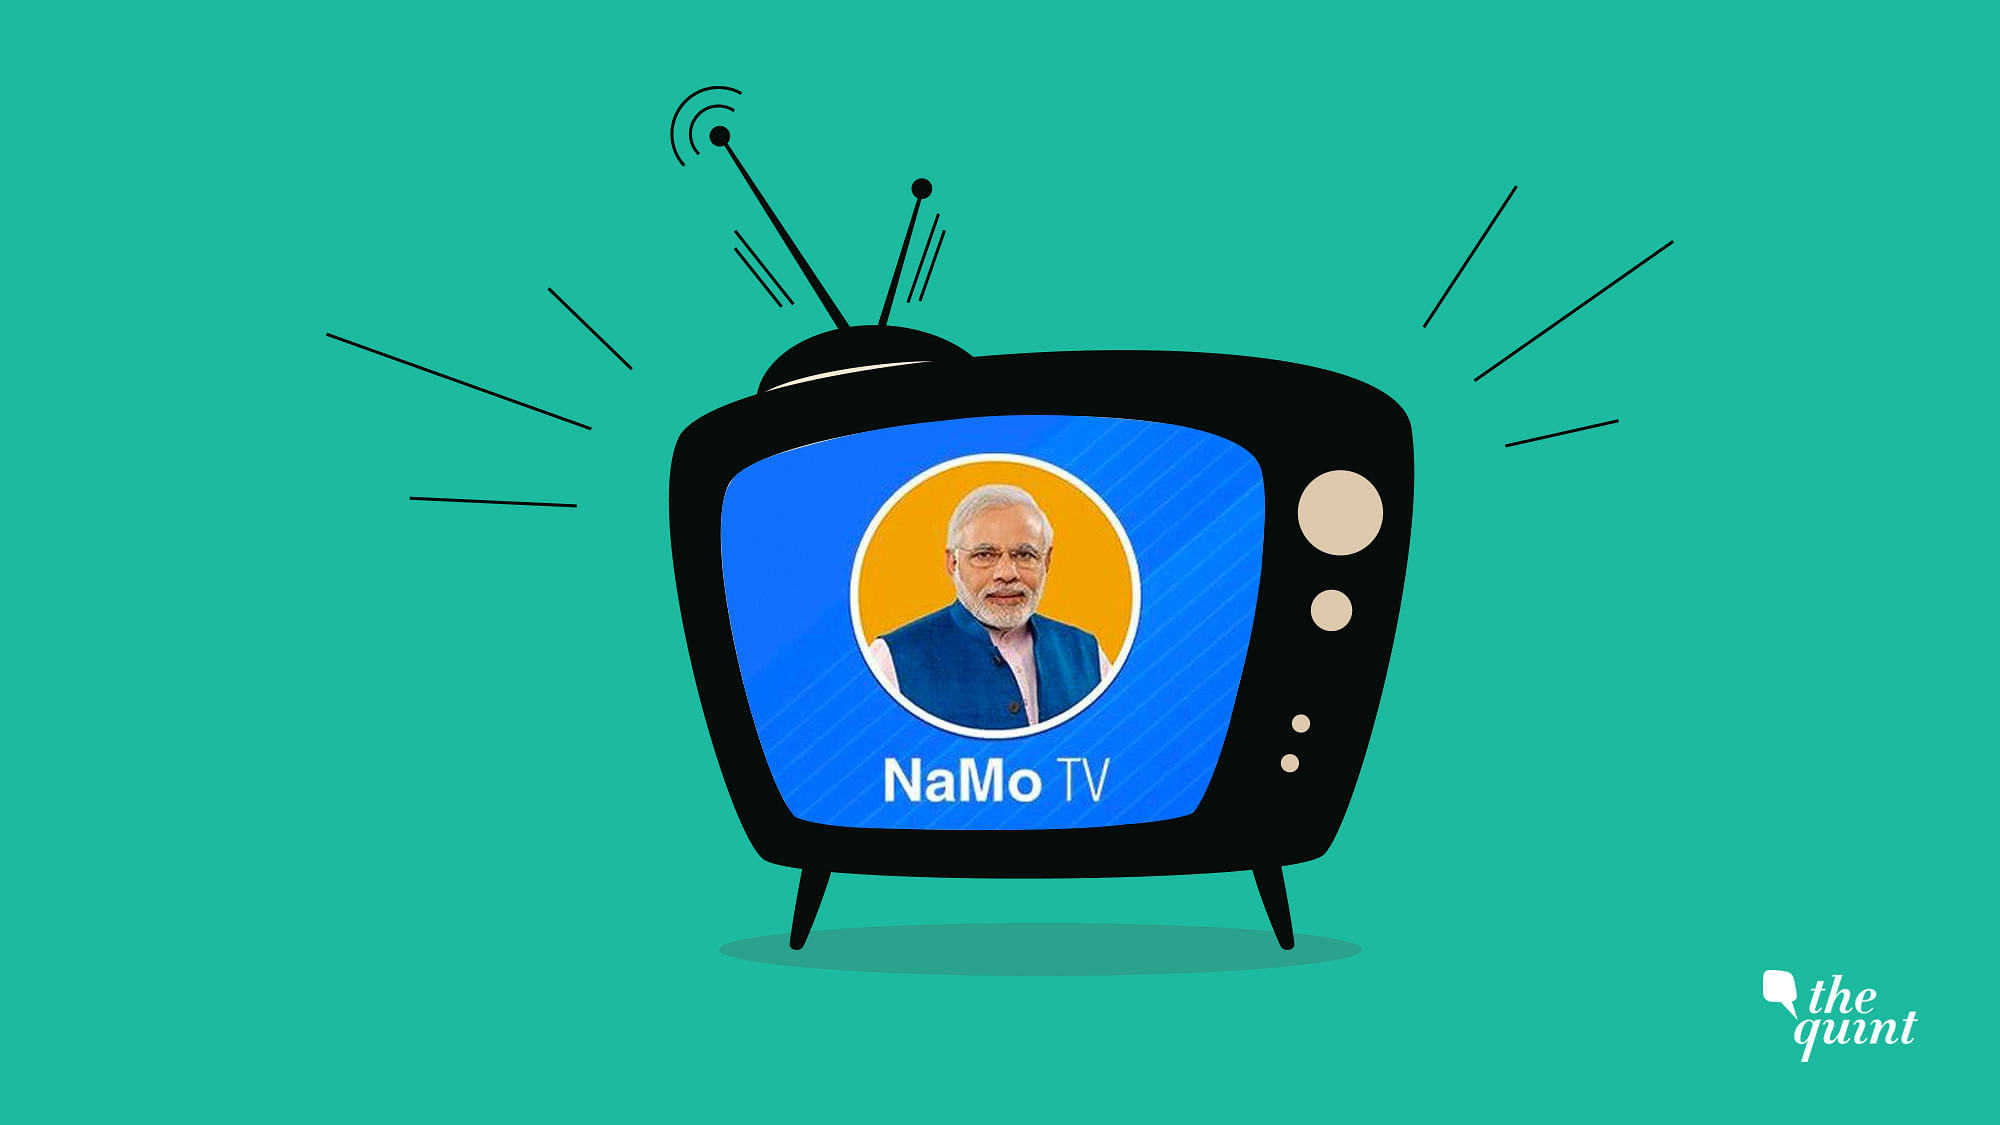 The 24-hour NaMo TV channel reportedly never applied for a broadcast licence.